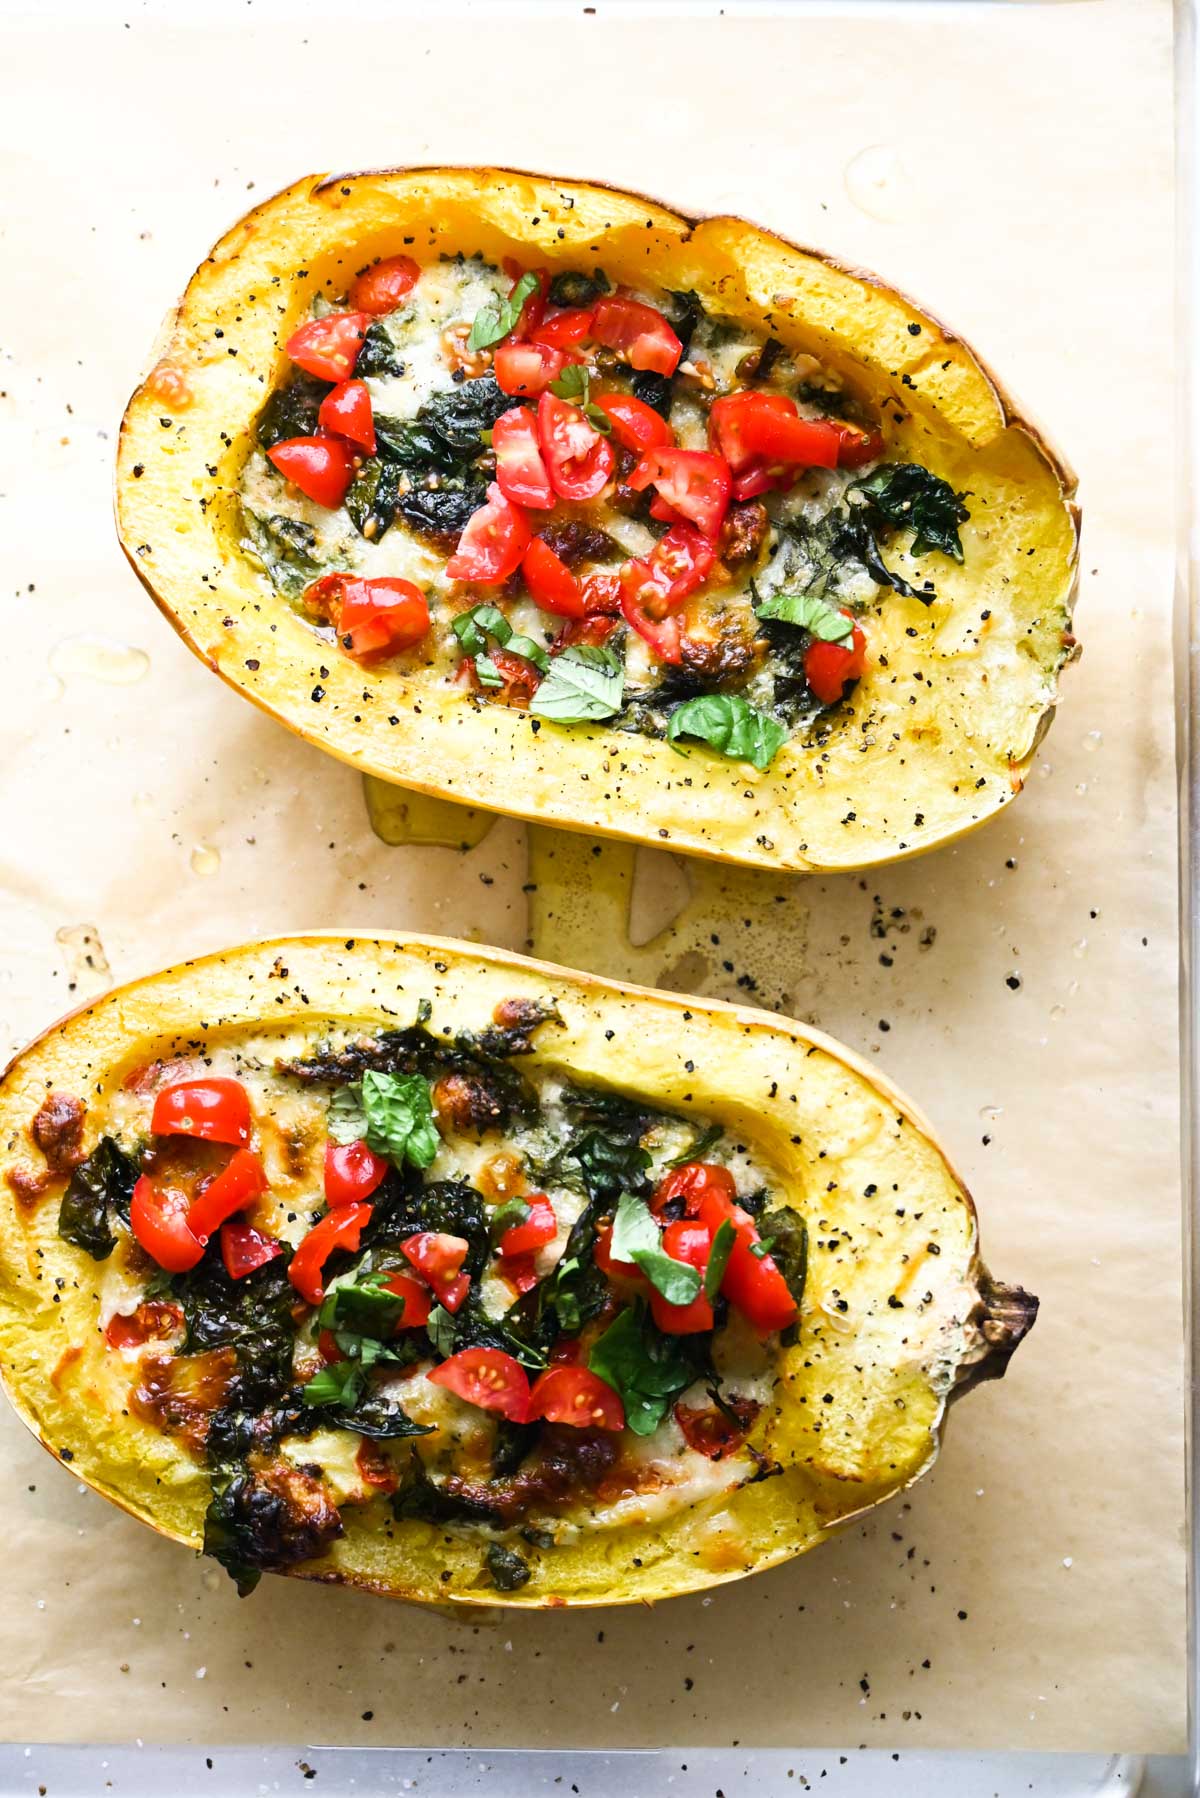 tomatoes and spinach inside spaghetti squash halves